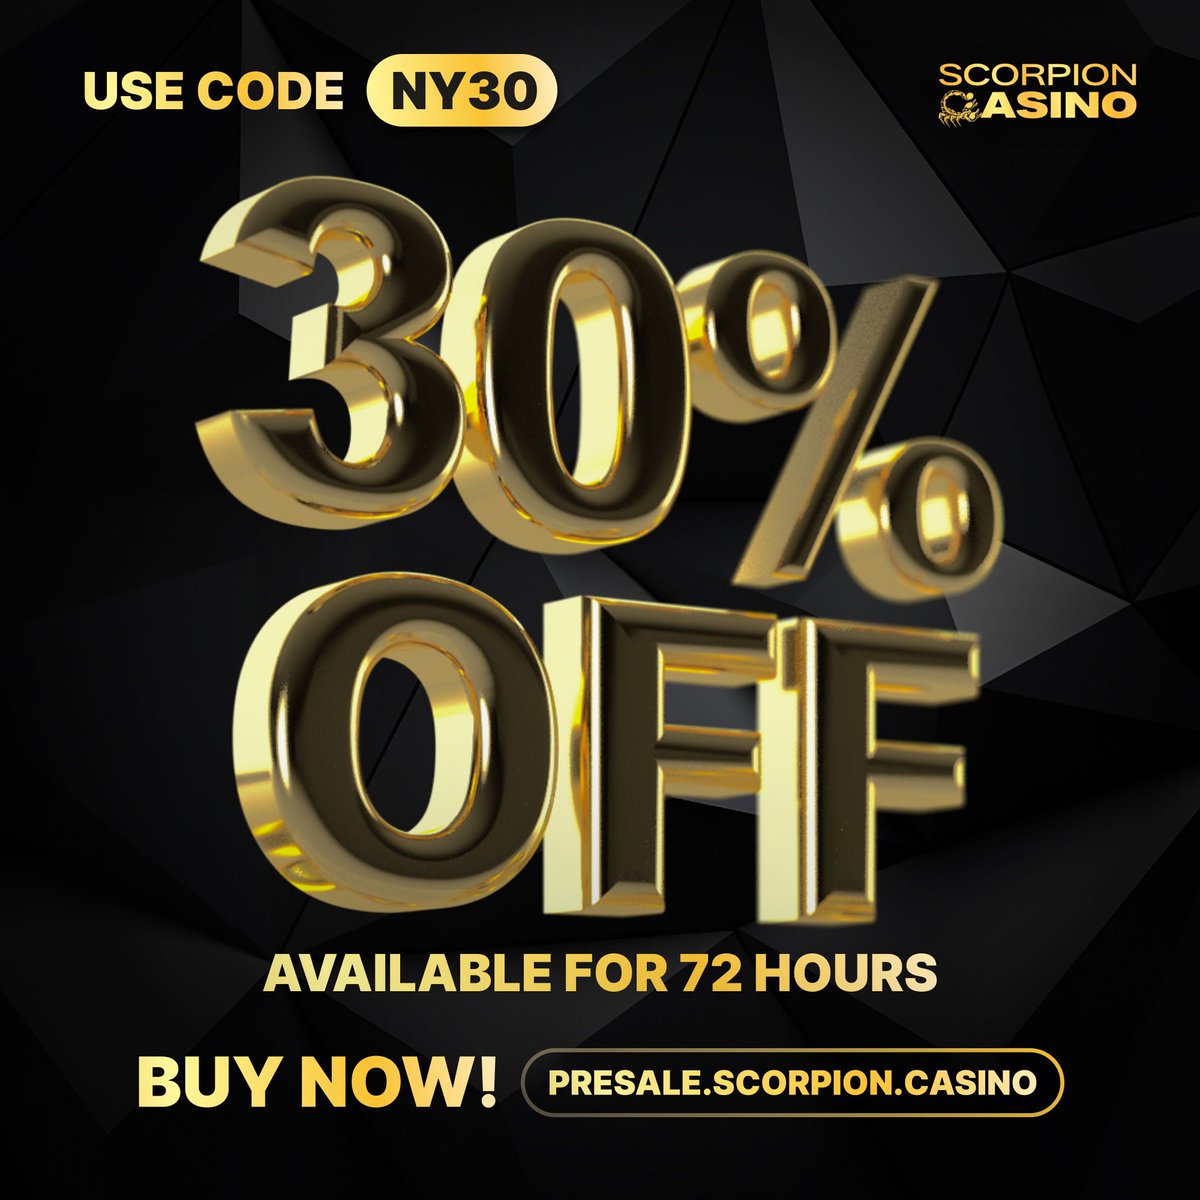 🎉 Kickstart the New Year with a BANG!

🎊 Use code 'NY30' and enjoy a fabulous 30% off on $SCORP tokens.

🚀 Hurry, this exclusive offer lasts only 72 hours! presale.scorpion.casino

#NewYearSale #ScorpionCasino #SCORPION #$SCORP #ScorpionCrypto #CryptoOnline #CryptoGambling